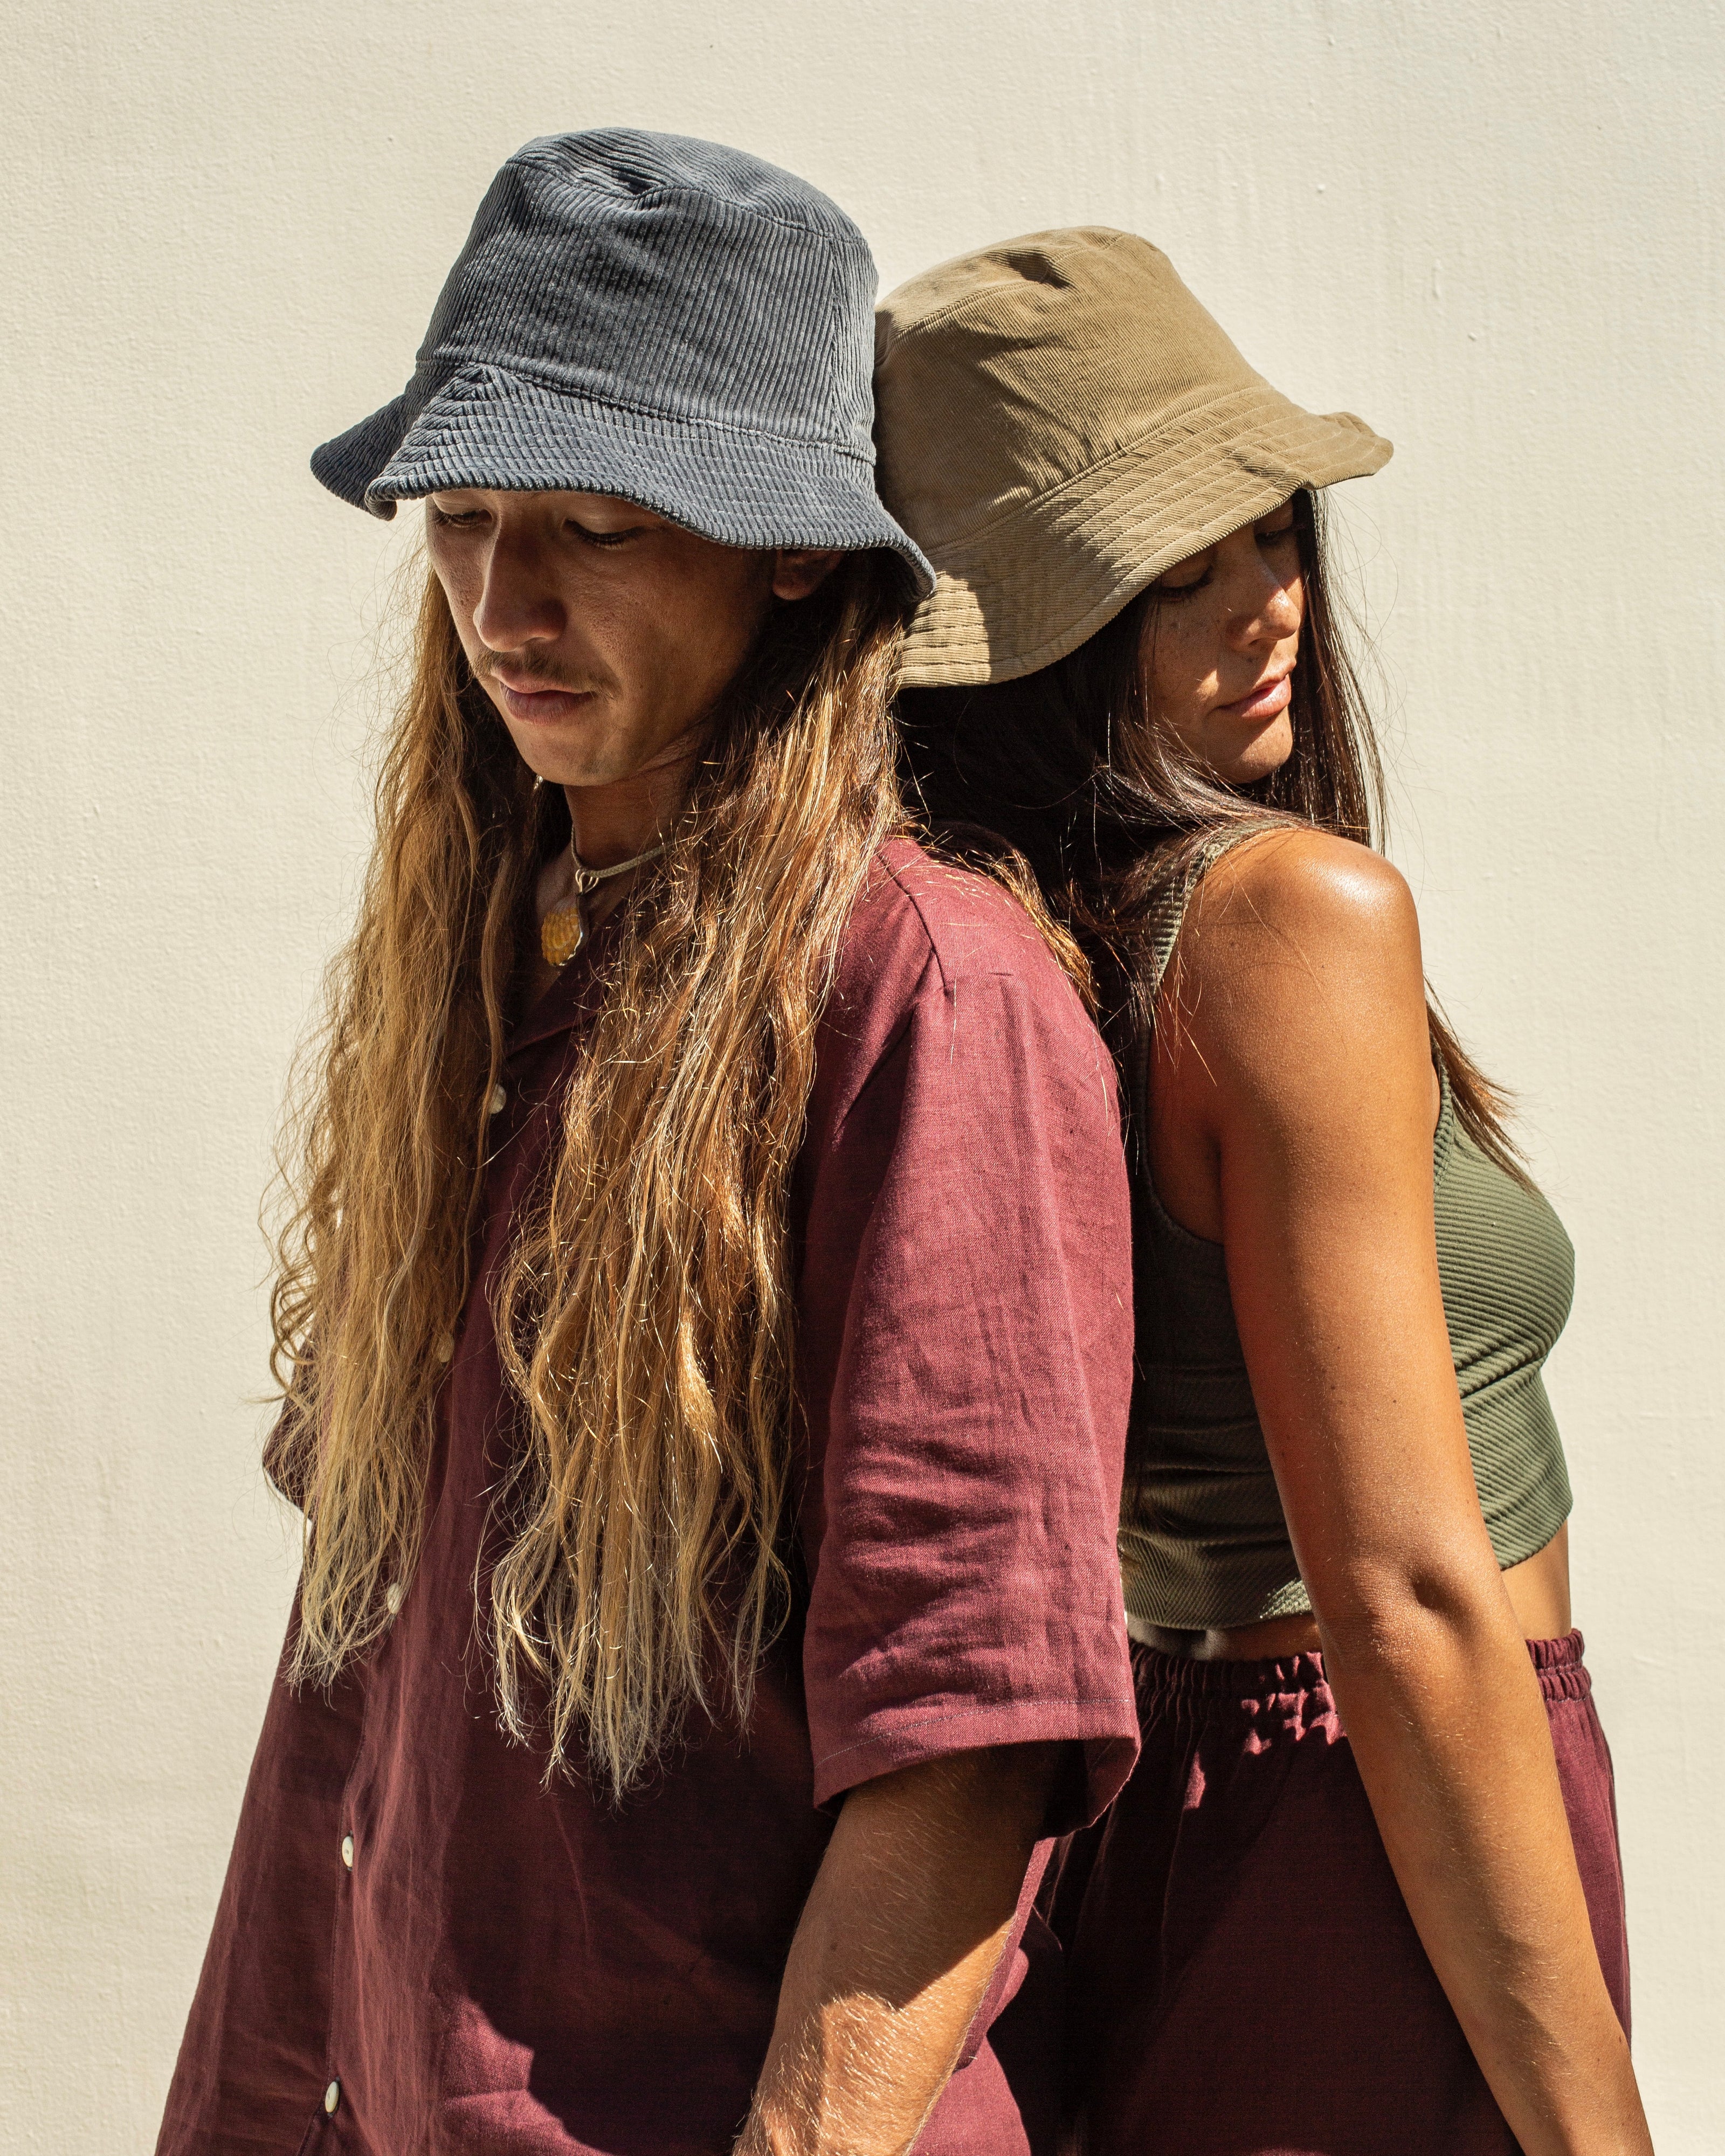 Guy and girl wearing unisex bucket hat in blue and beige corduroy fabrics.